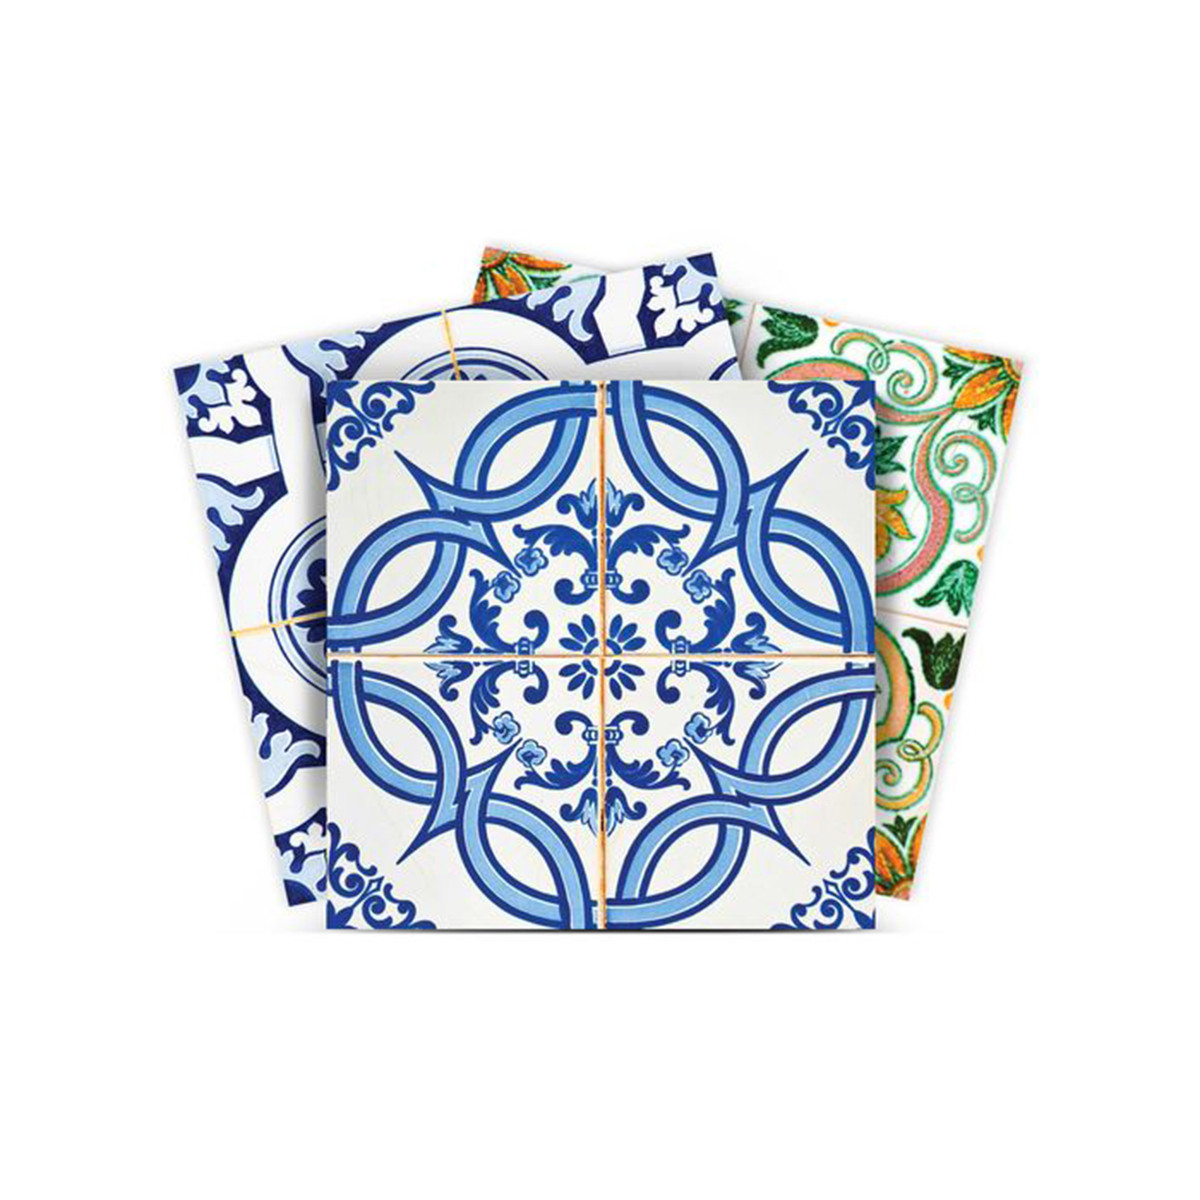 7" X 7" Cana Multi Mosaic Peel and Stick Tiles-400323-1